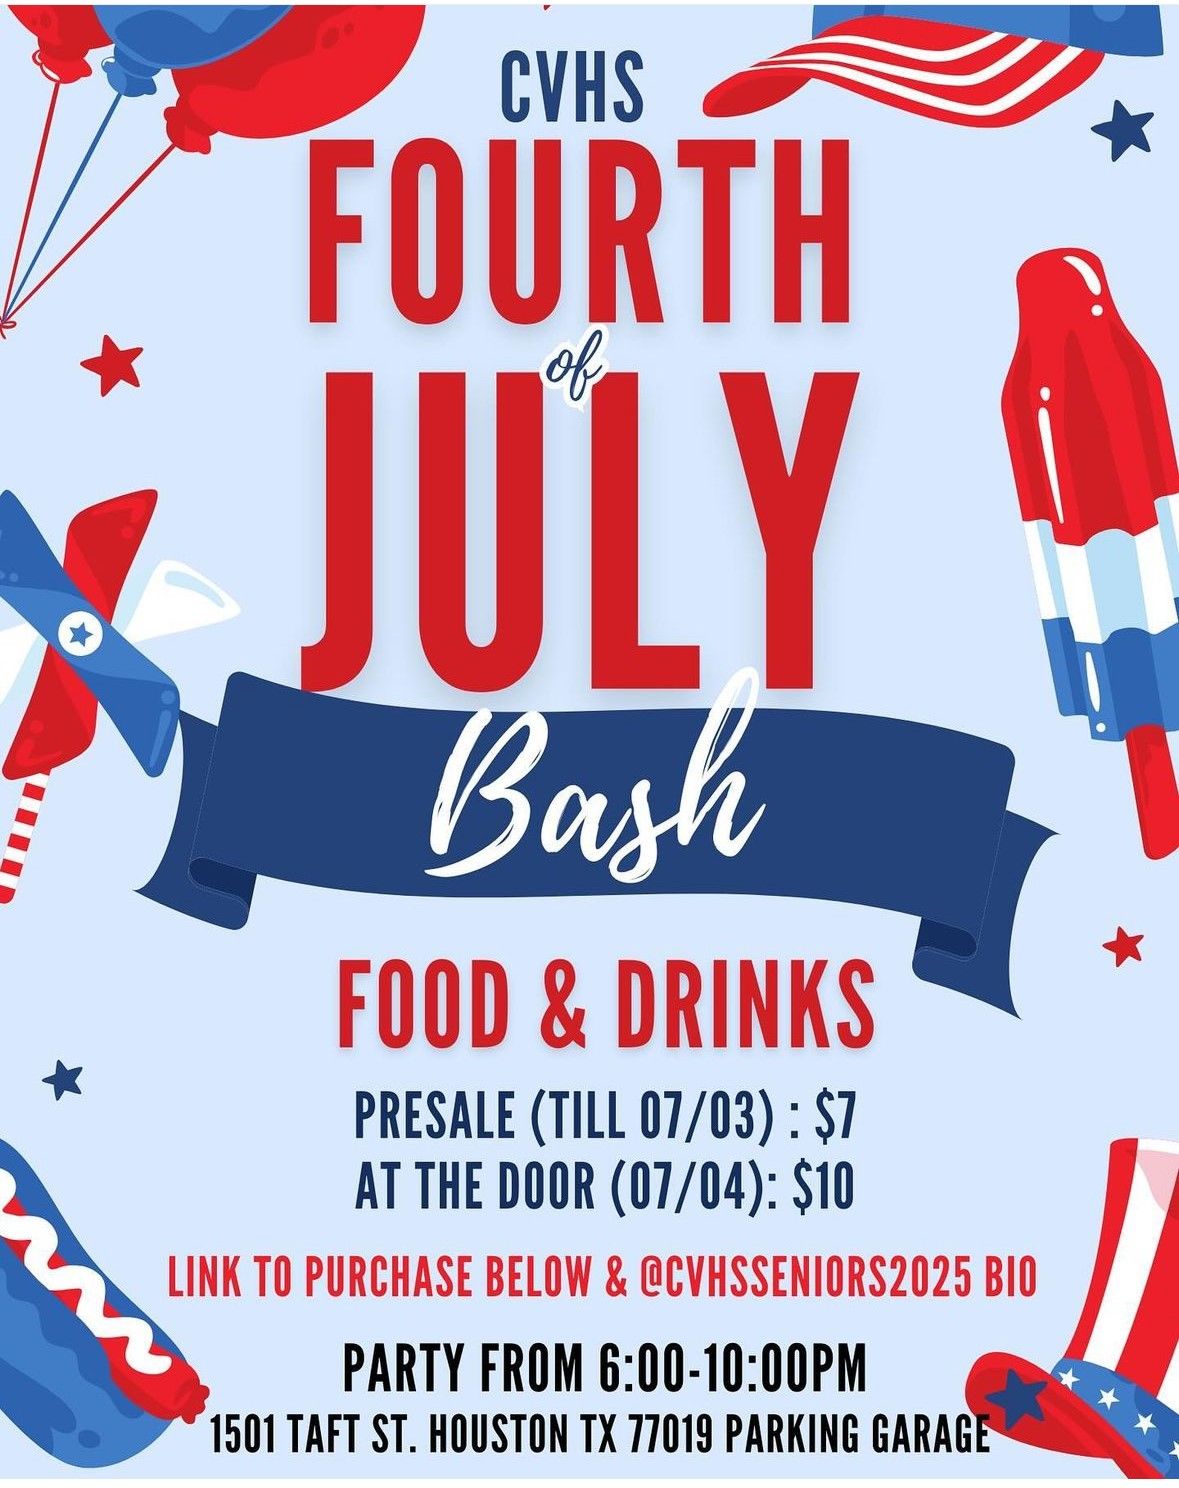 CVHS 4th of July Event and Fundraiser